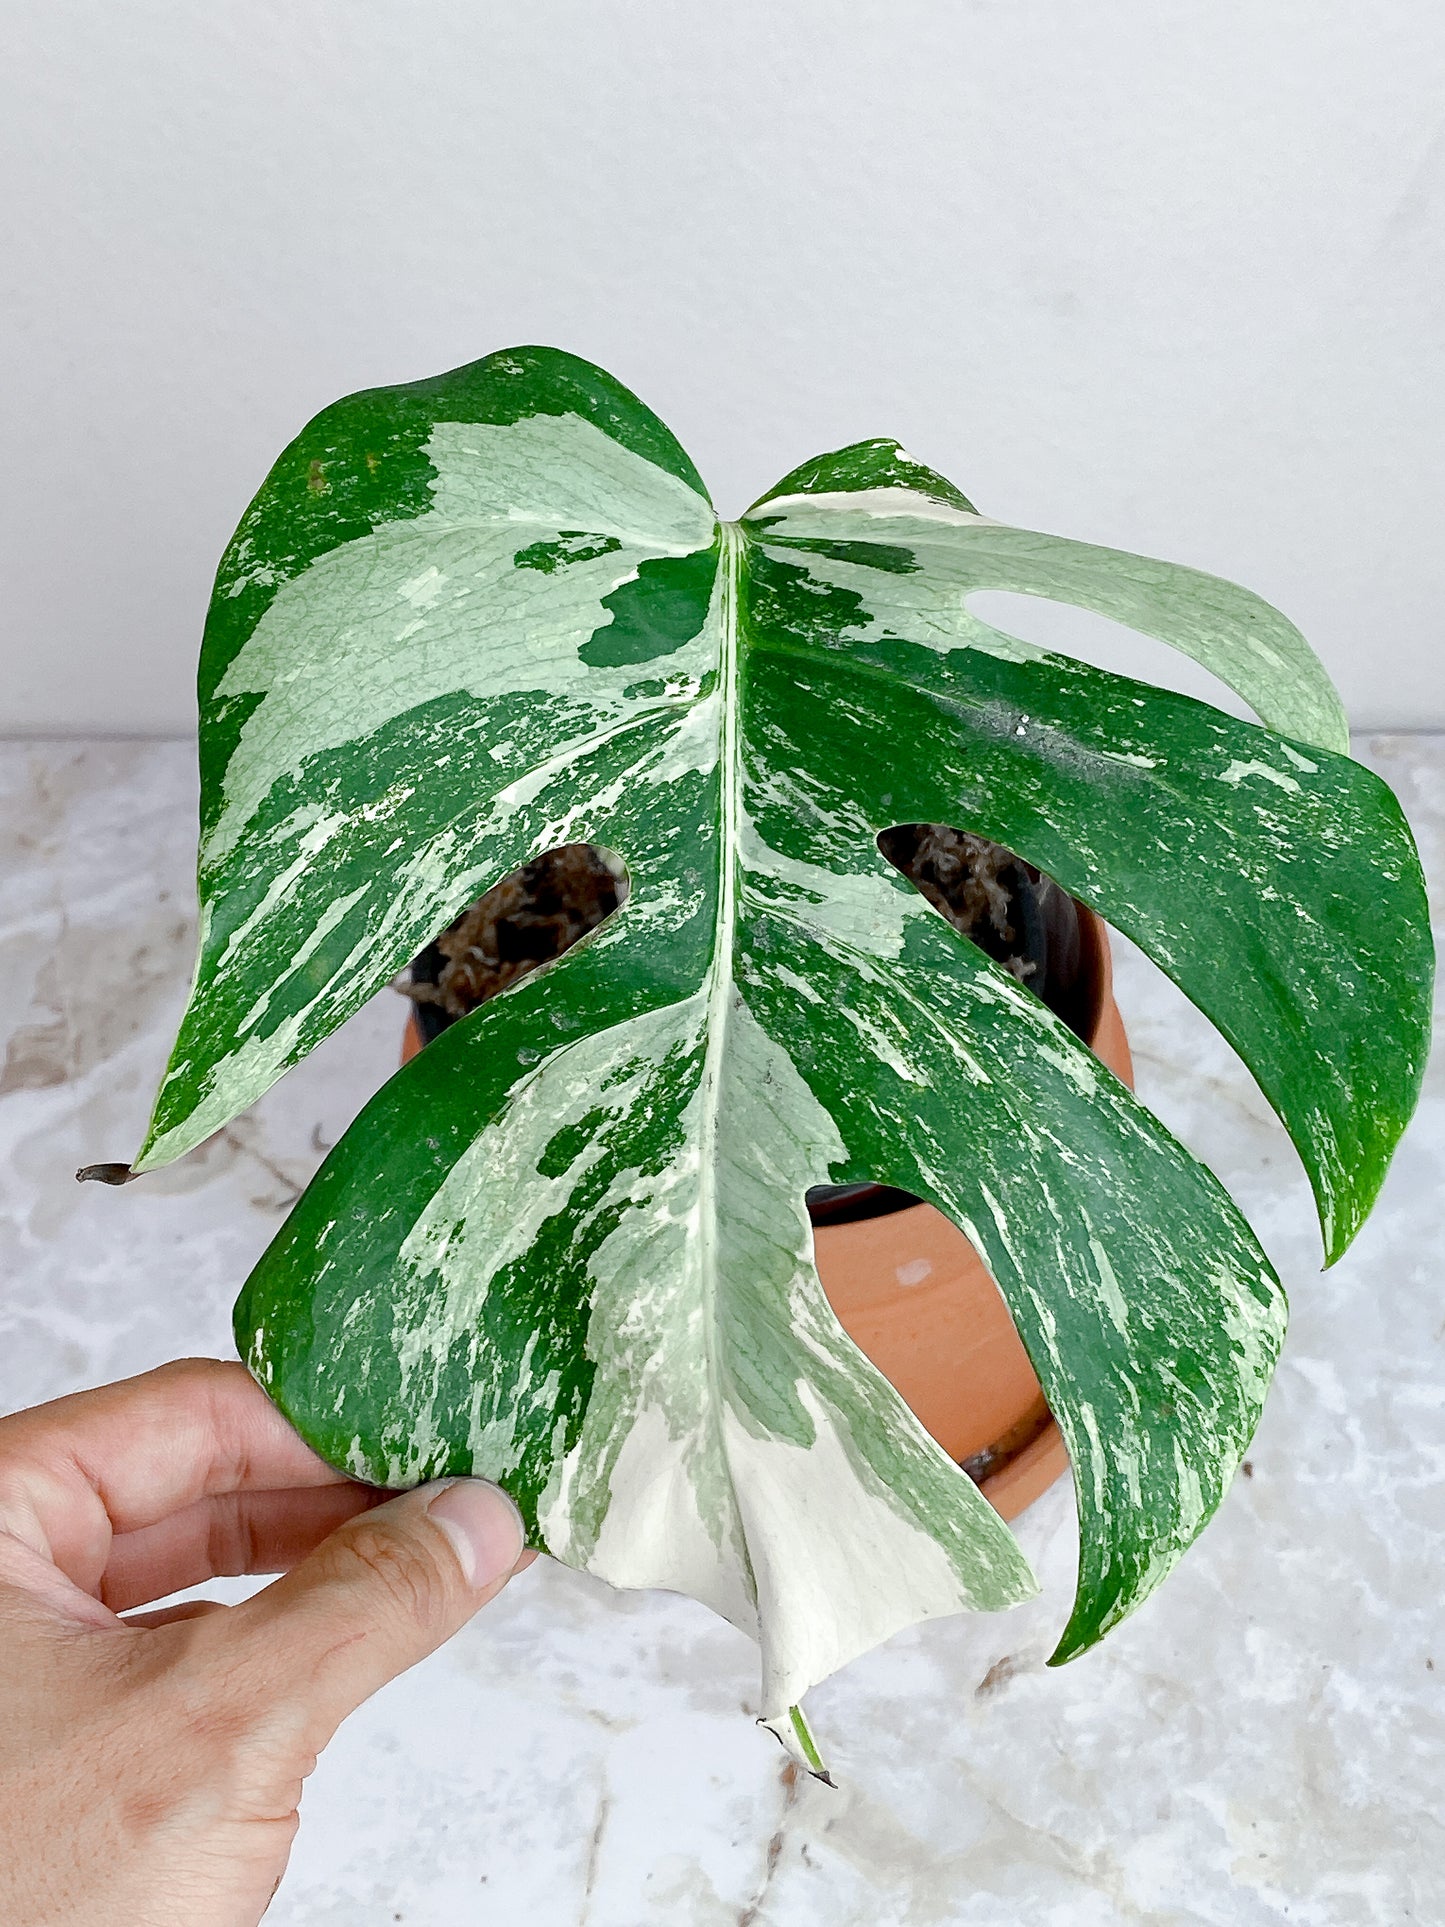 Monstera Albo Variegated rooted